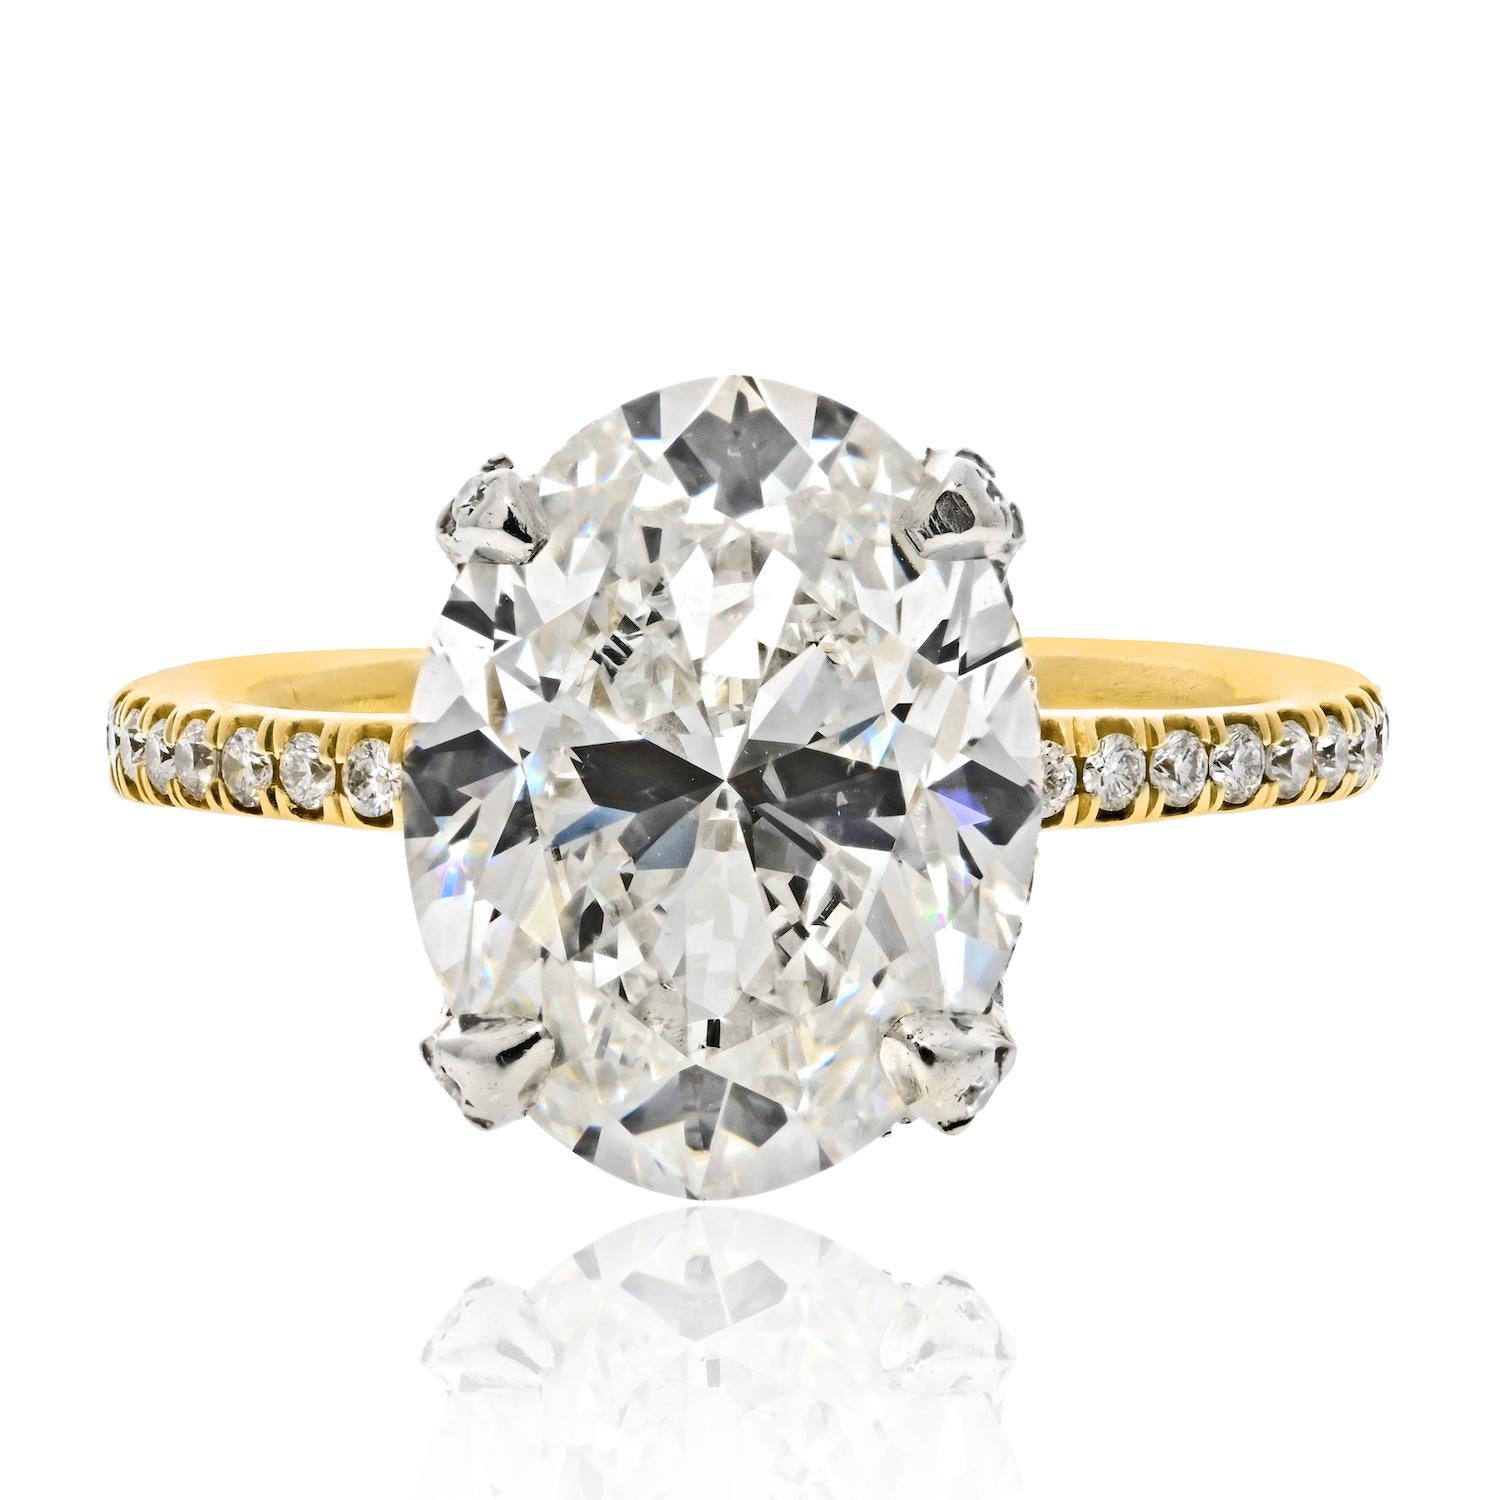 Classic diamond engagement ring with a 5 carat Oval Cut diamond. It is GIA-certified J color, VS1 clarity. We love the pave diamond setting with the hidden halo and diamonds on the prongs. When she puts this ring on all she will see is this gorgeous